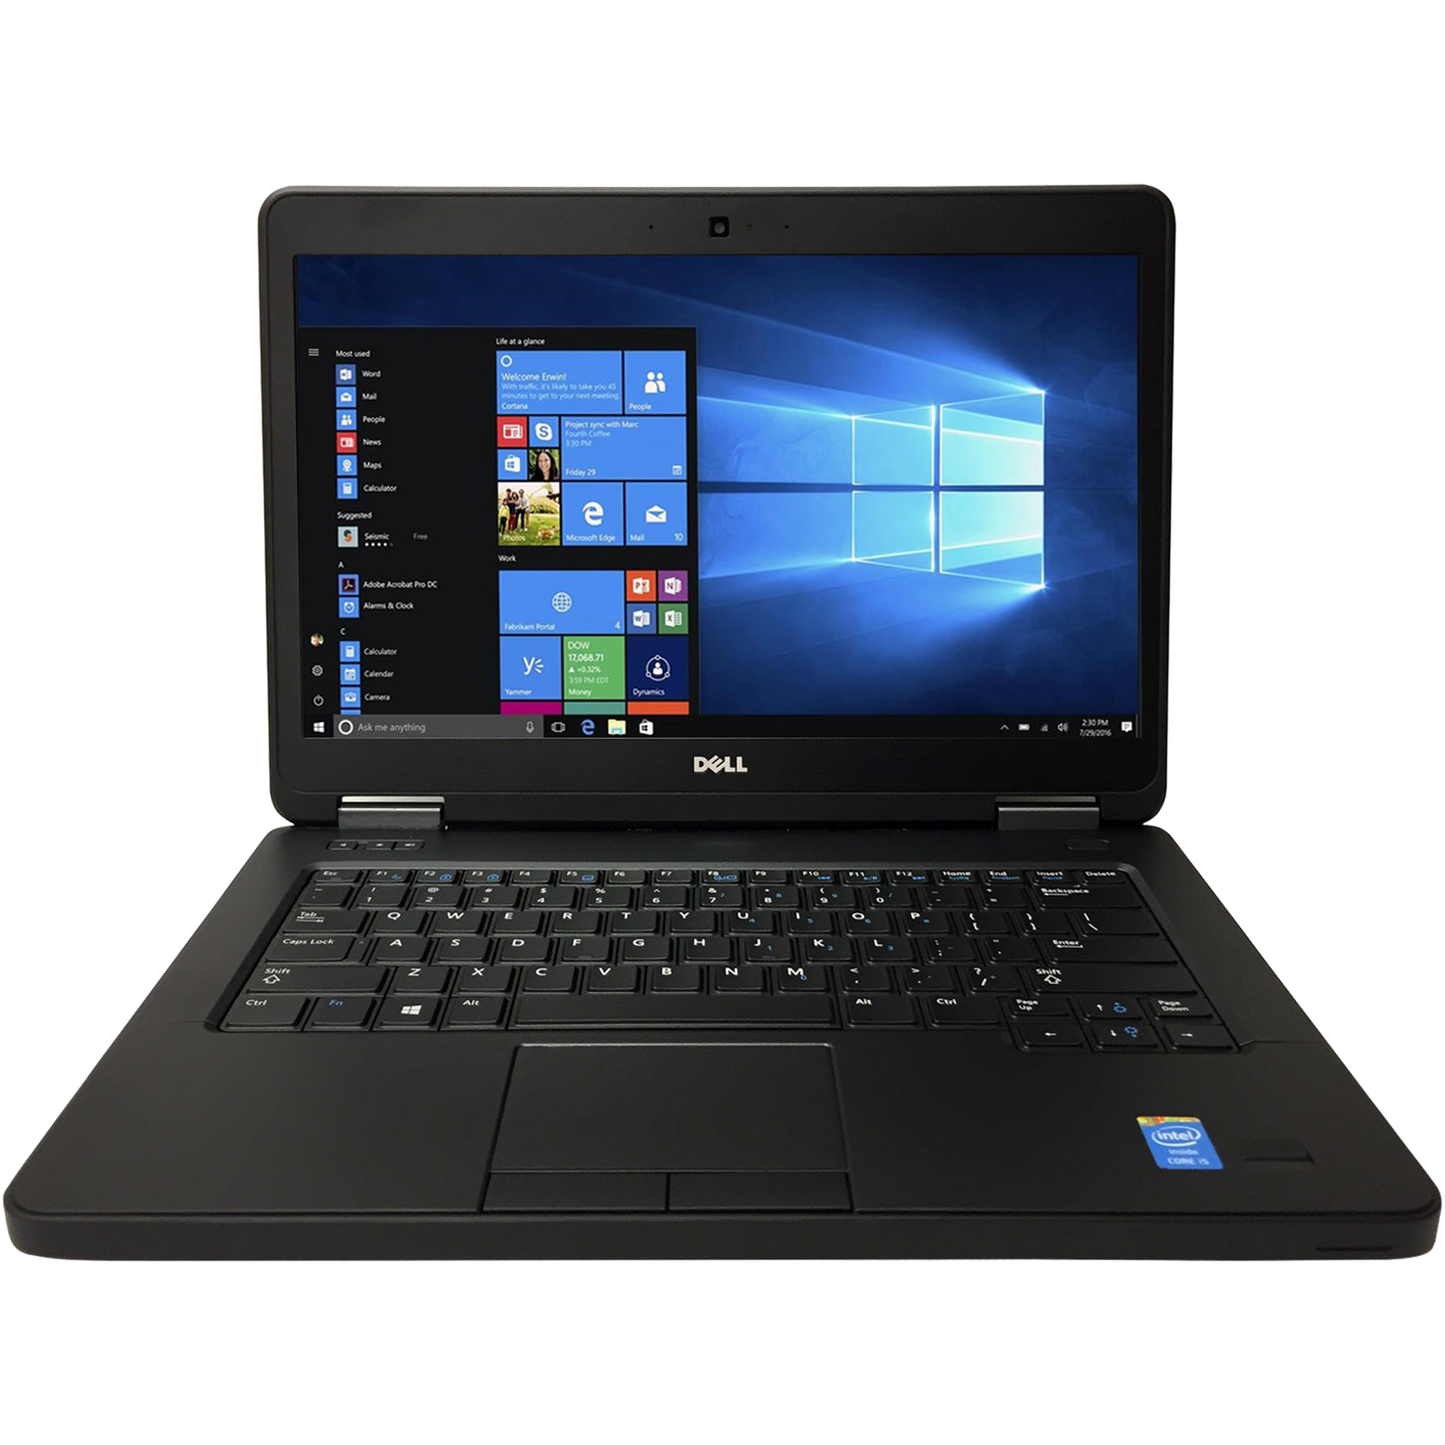 Dell Latitude 5440 Intel i7, 4th Gen Laptop with Dedicated Graphics Laptops - Refurbished